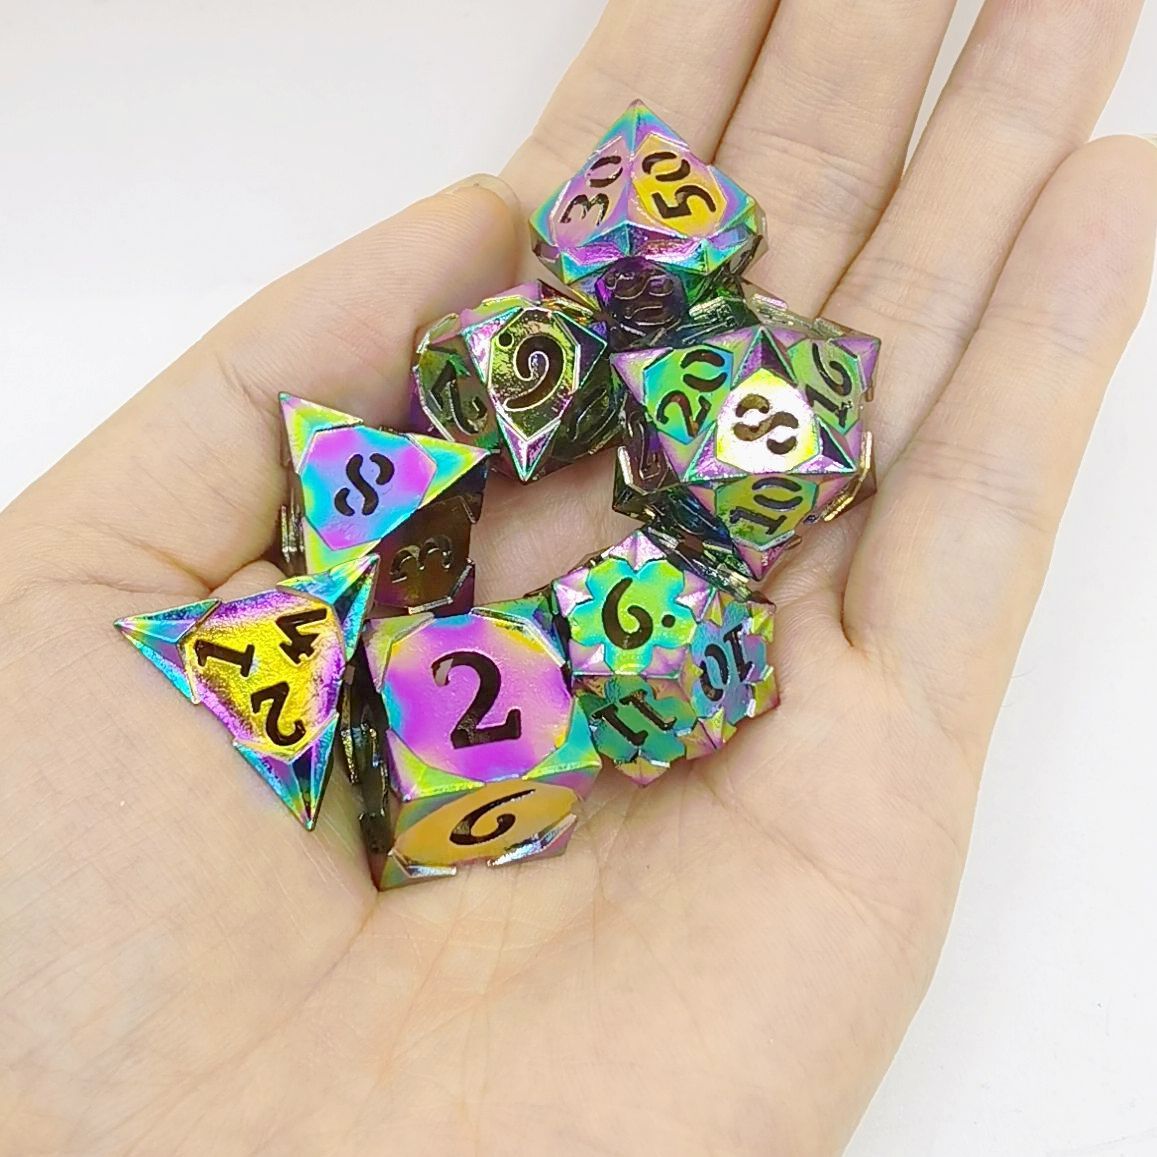 HYMGHO Morning Star Dice hollow out numbers Prism Rainbow